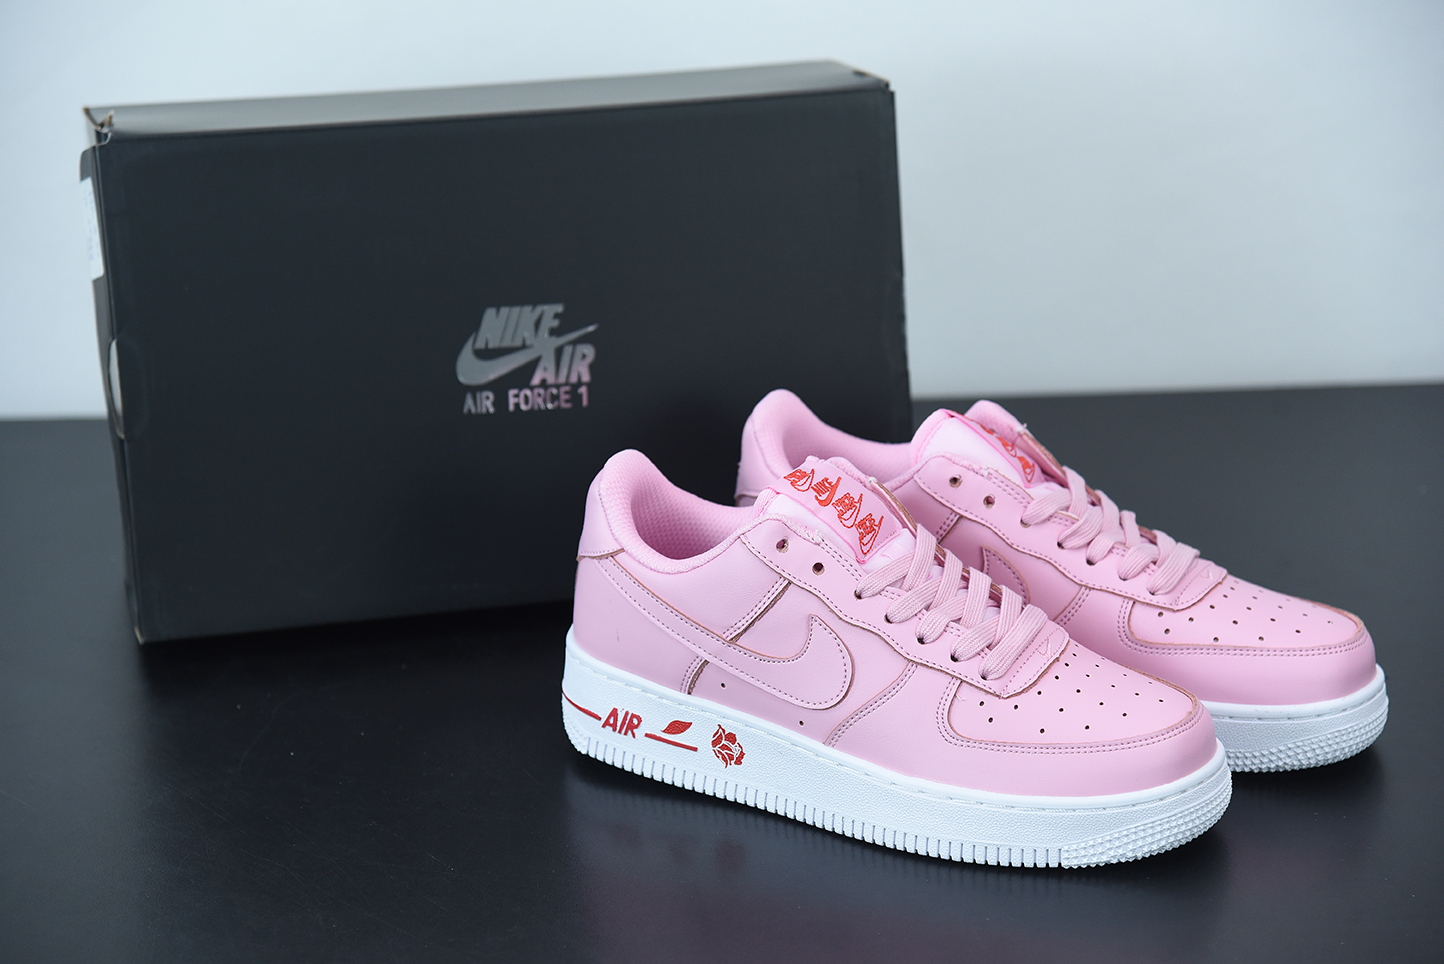 mucho adolescente Discurso 600 – Tra-incShops - Nike Air Force 1 Low “Rose” Pink Foam/White - Pine  Green CU6312 - Red - nike lunar pegasus 89 wolf grey shoes for sale